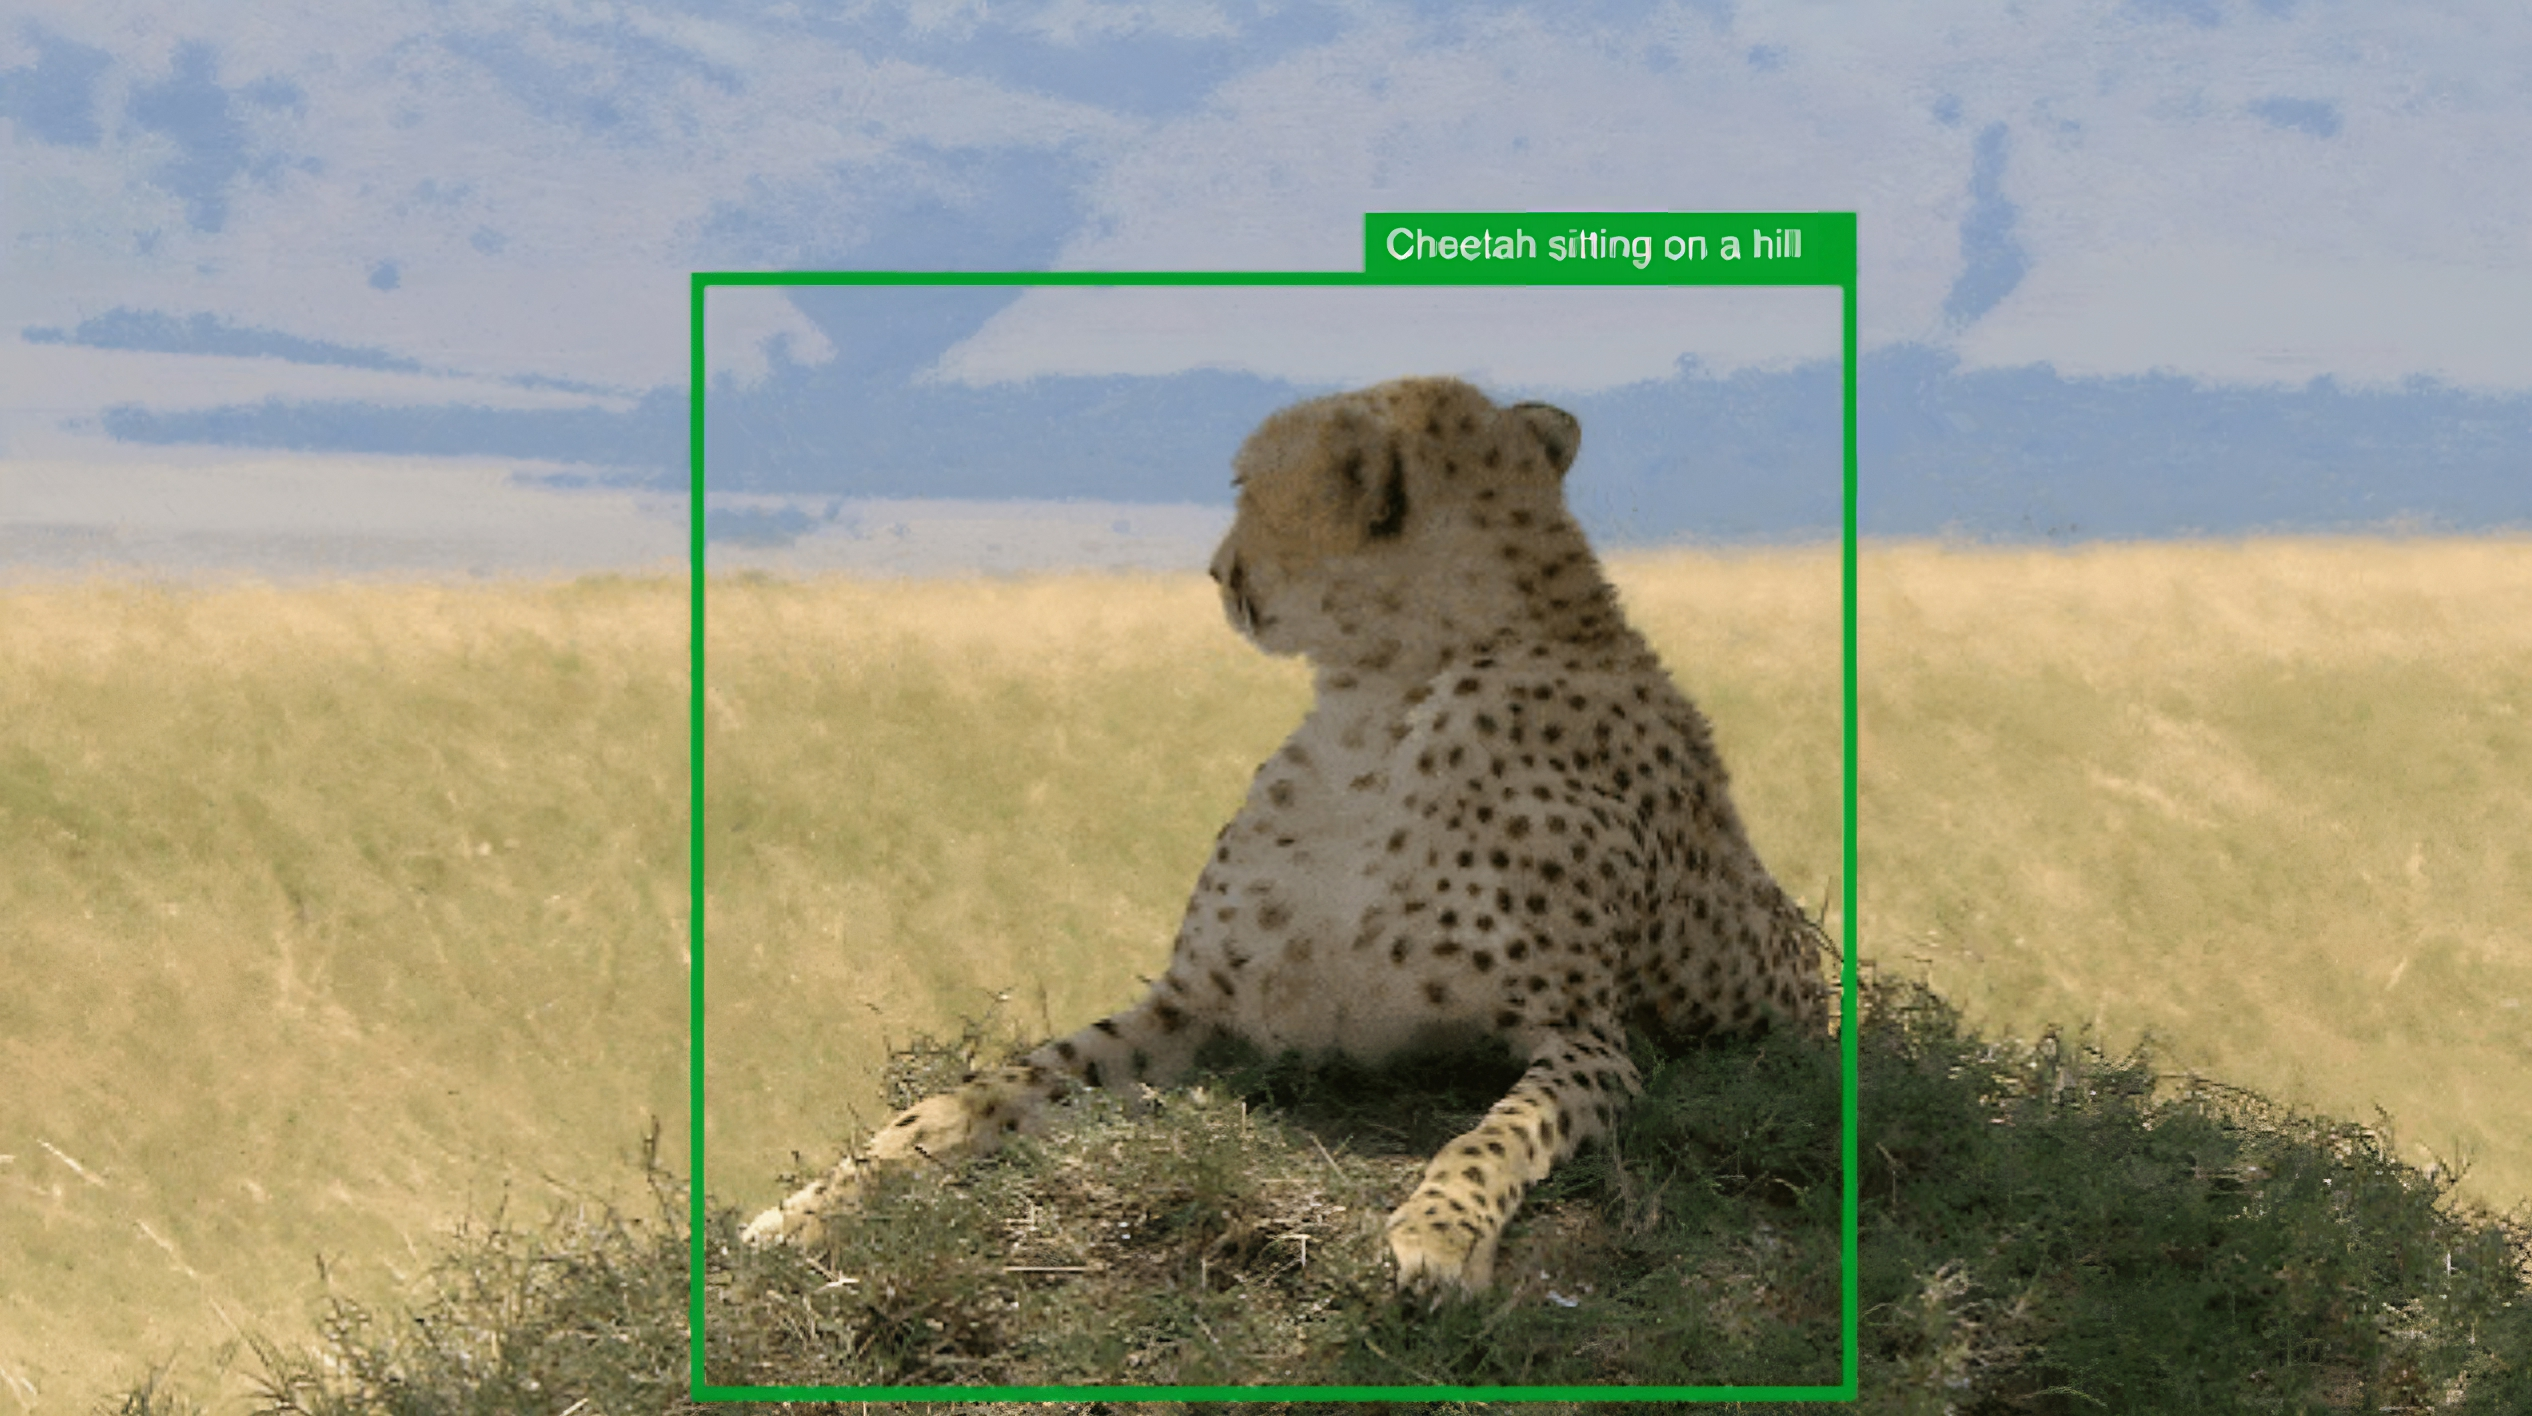 Microsoft’s computer vision model will generate alt text for Reddit images